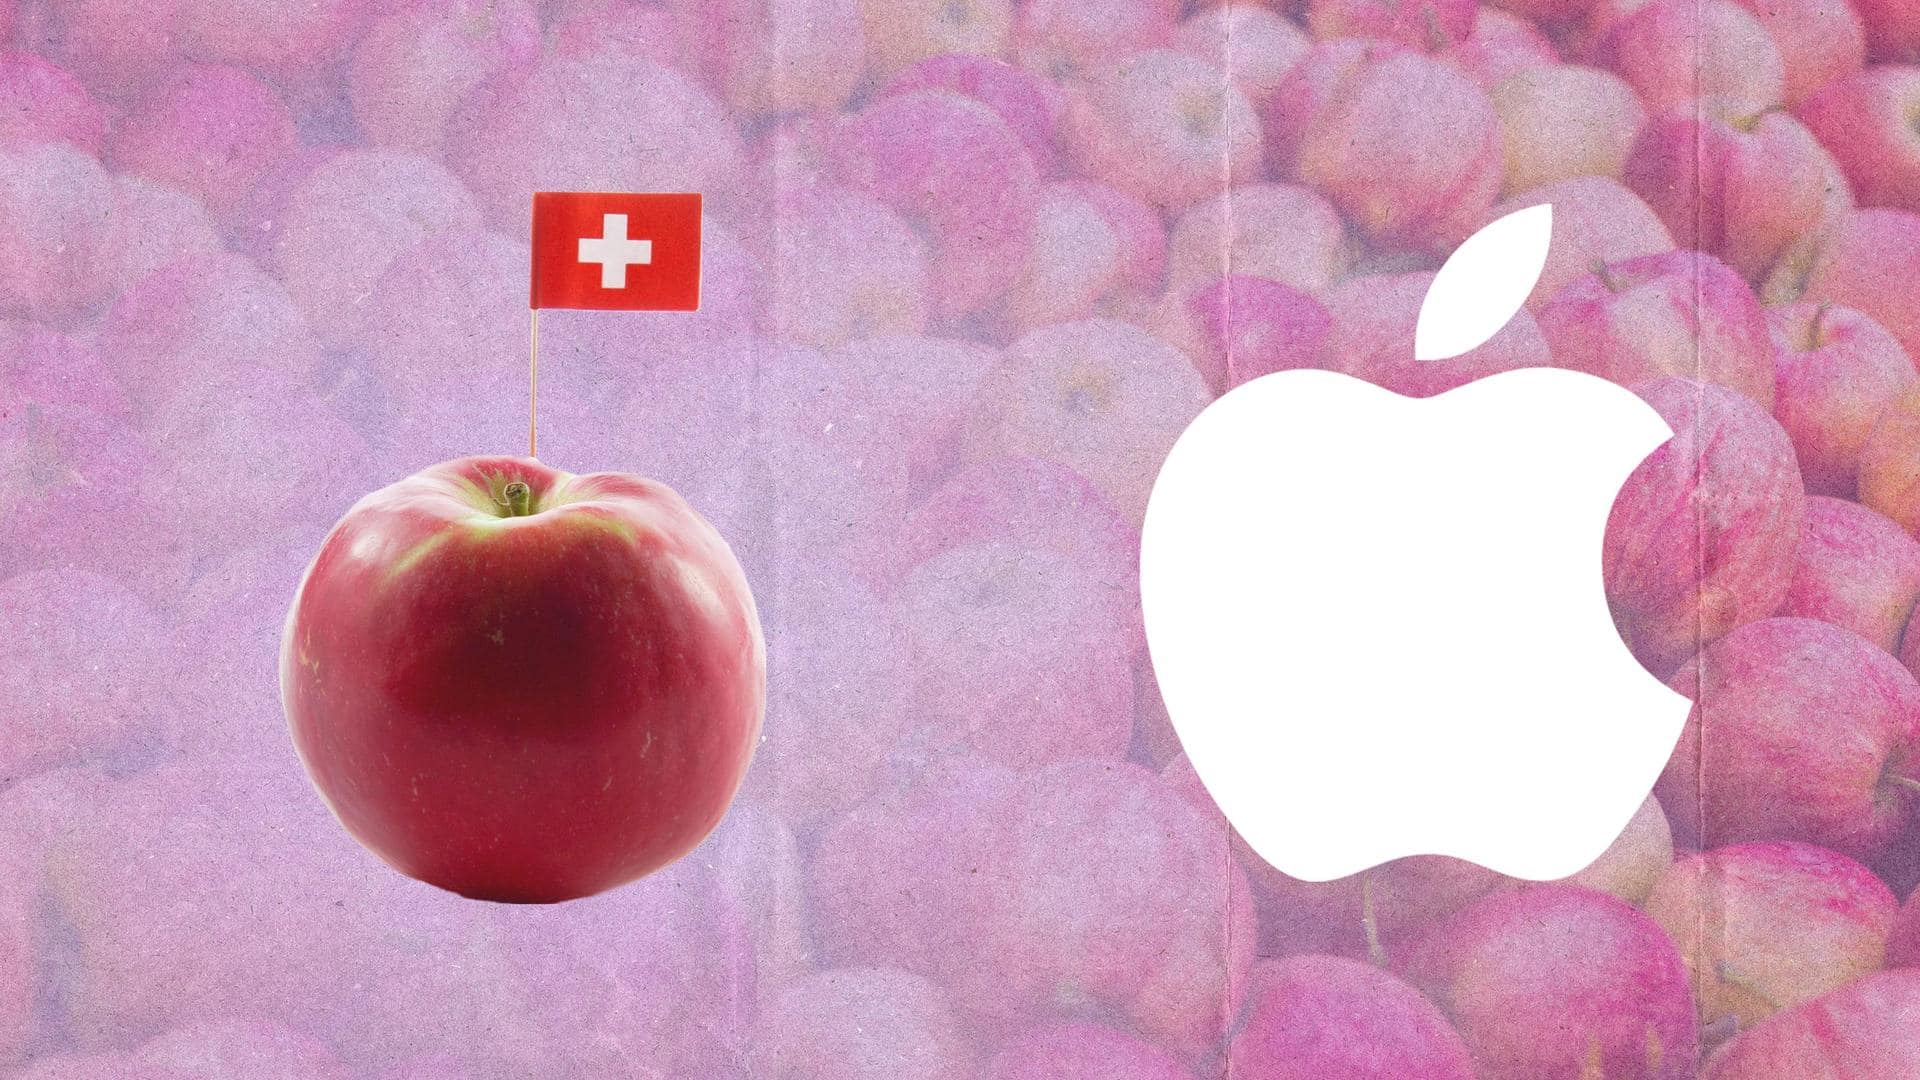 Apple Is Taking On Apples in a Truly Weird Trademark Battle